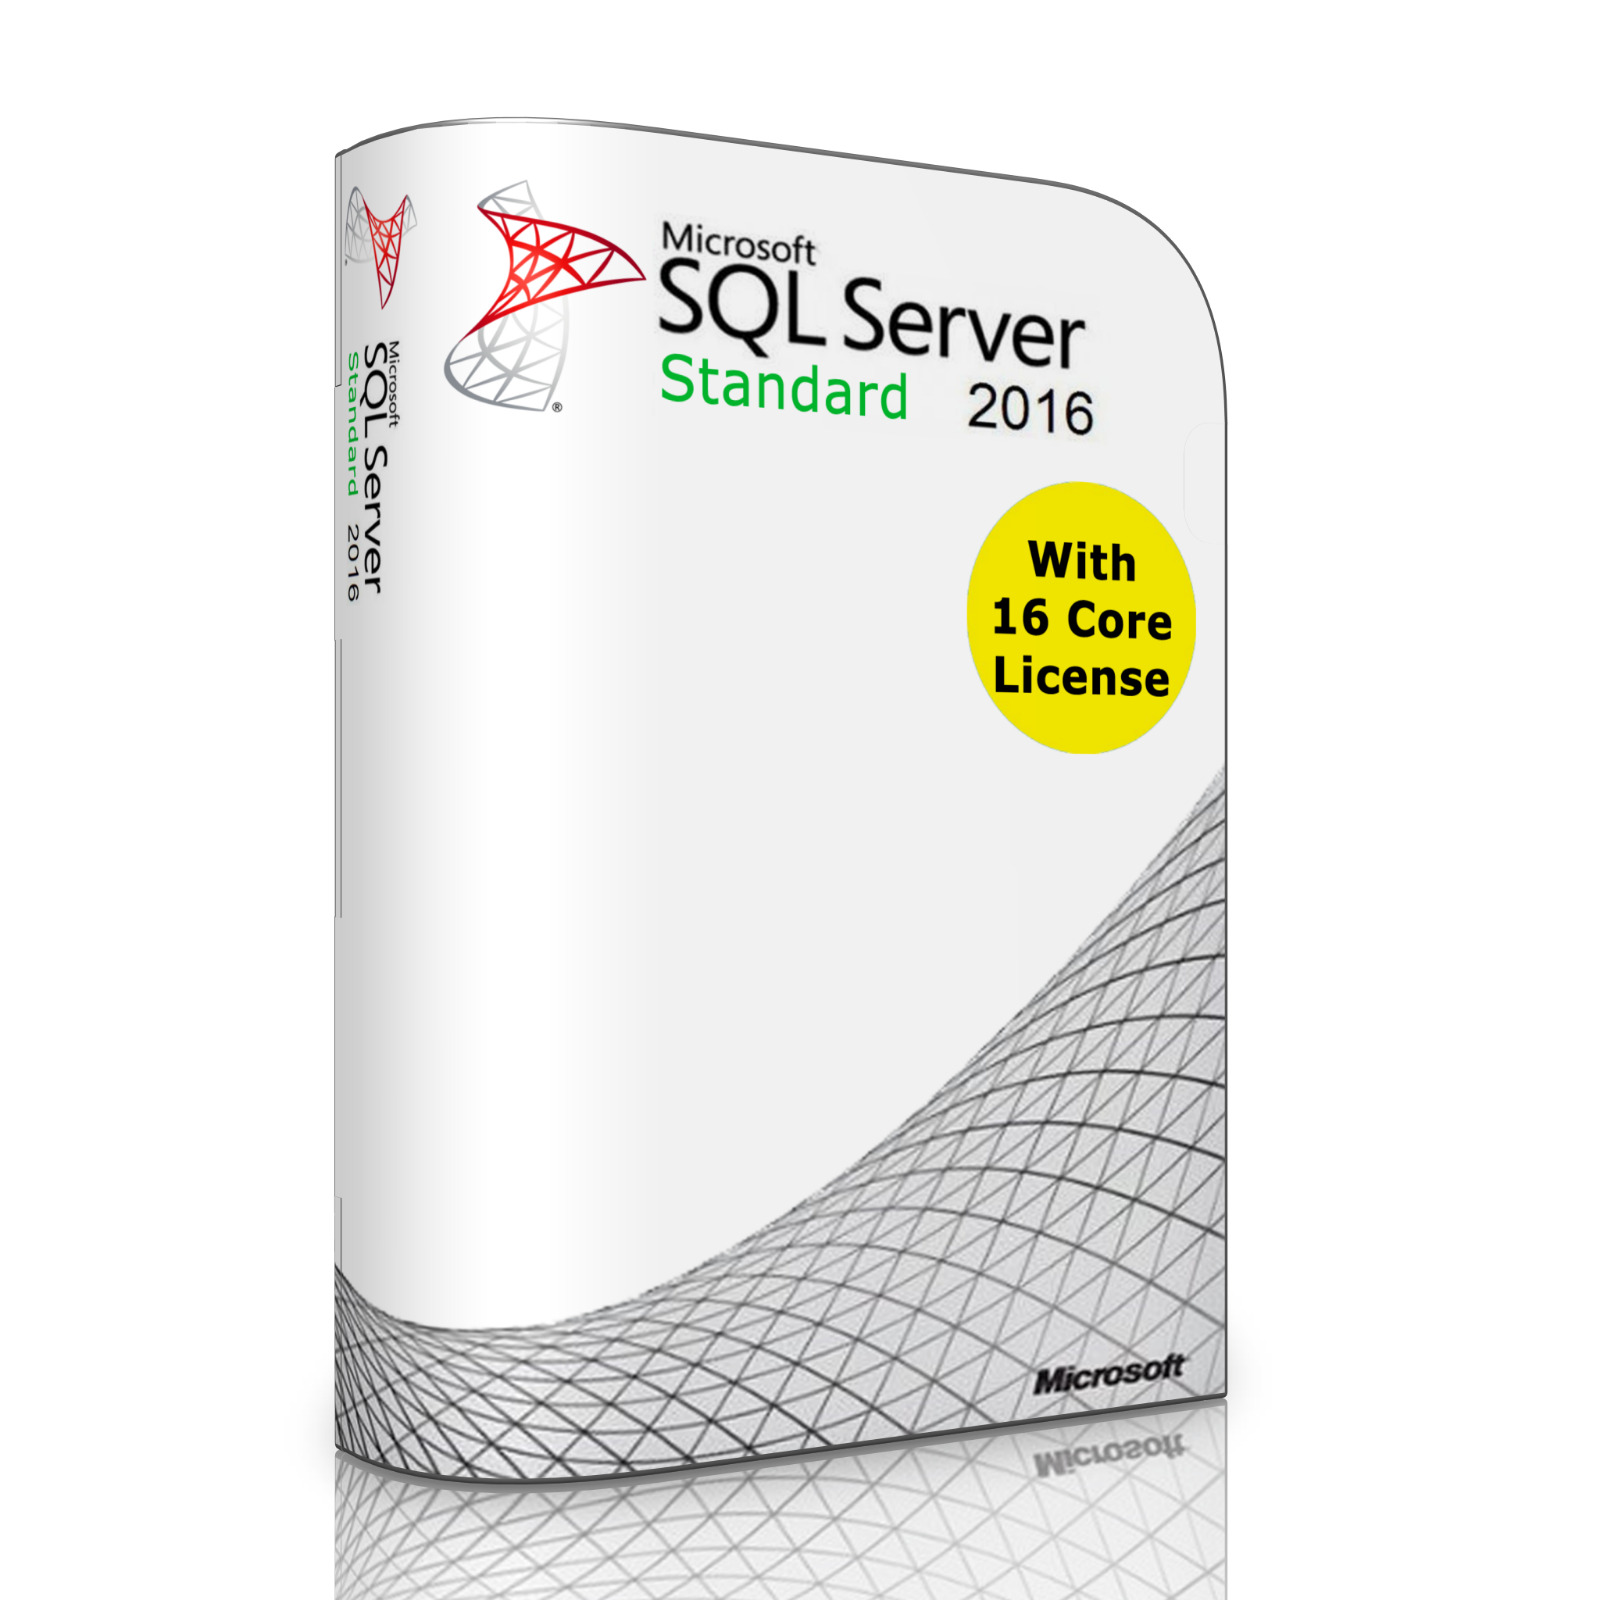 Microsoft SQL Server 2016 Standard with 16 Core License, unlimited User CALs New